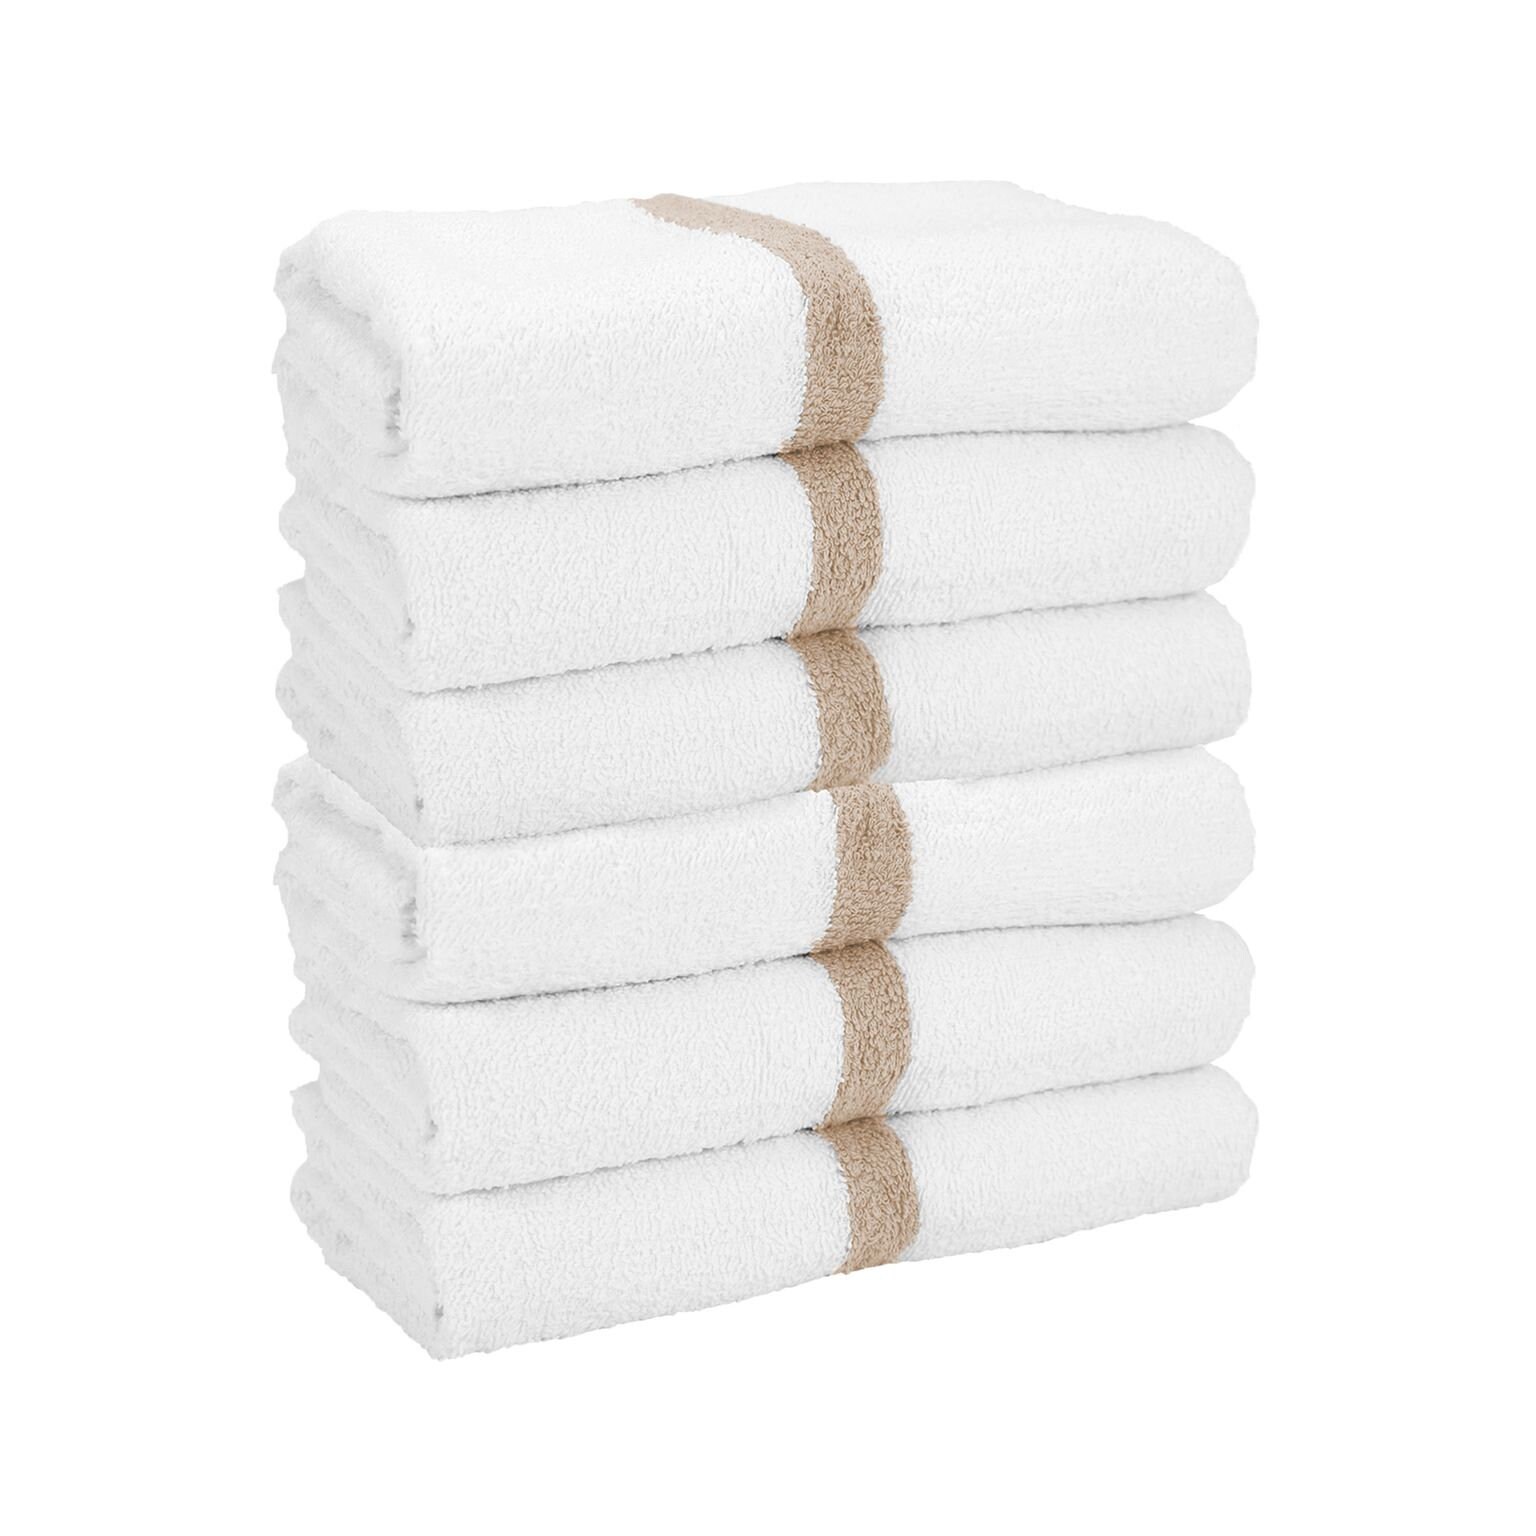 Arkwright Power Gym Bath Towels (6 Pack), 22x44 in., White with Blue Stripe, Soft Cotton, Size: 22 x 44